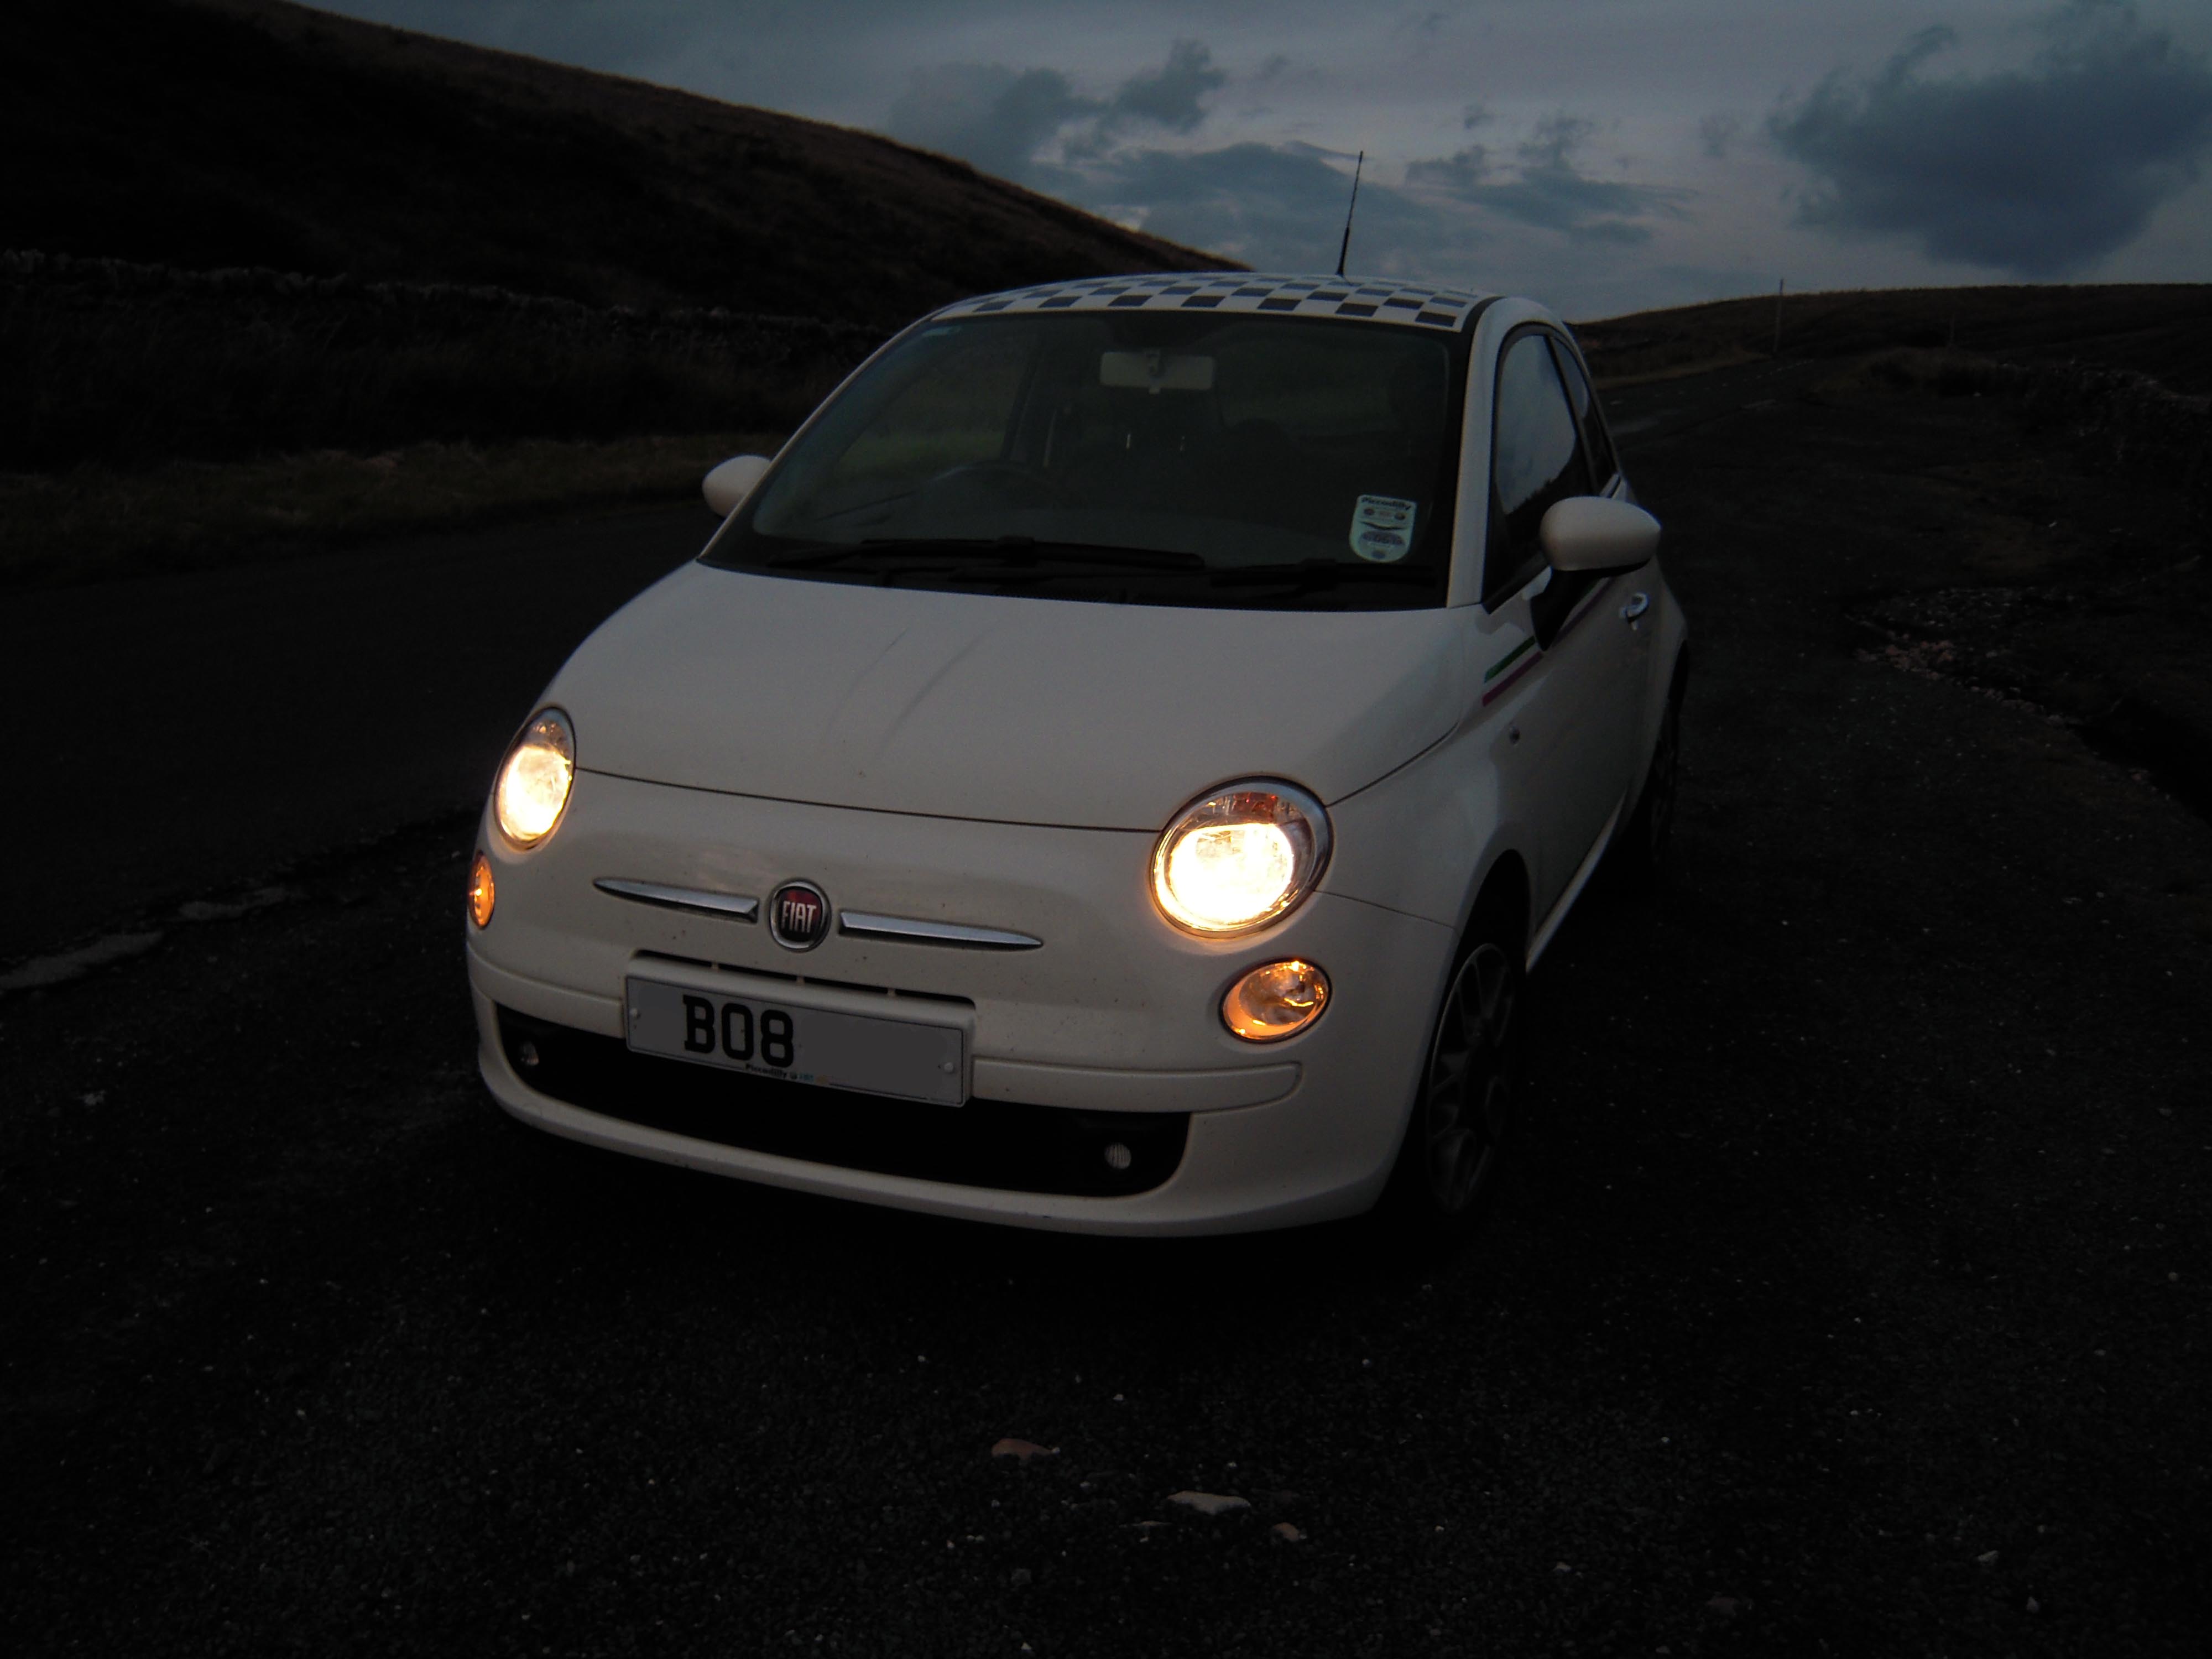 Fiat 500 headlamps and DRLs